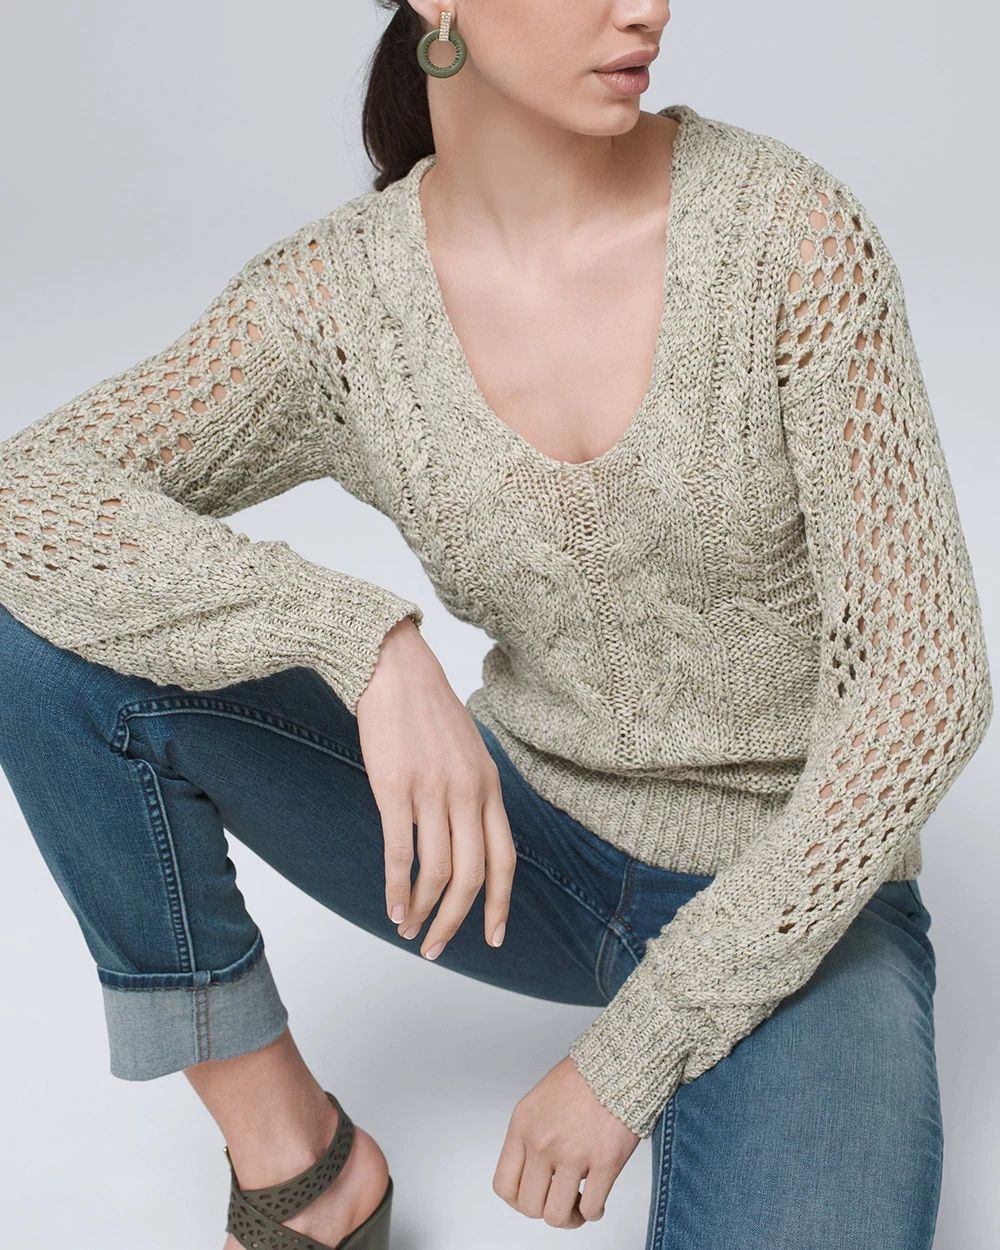 Stitchy Marled Pullover Sweater